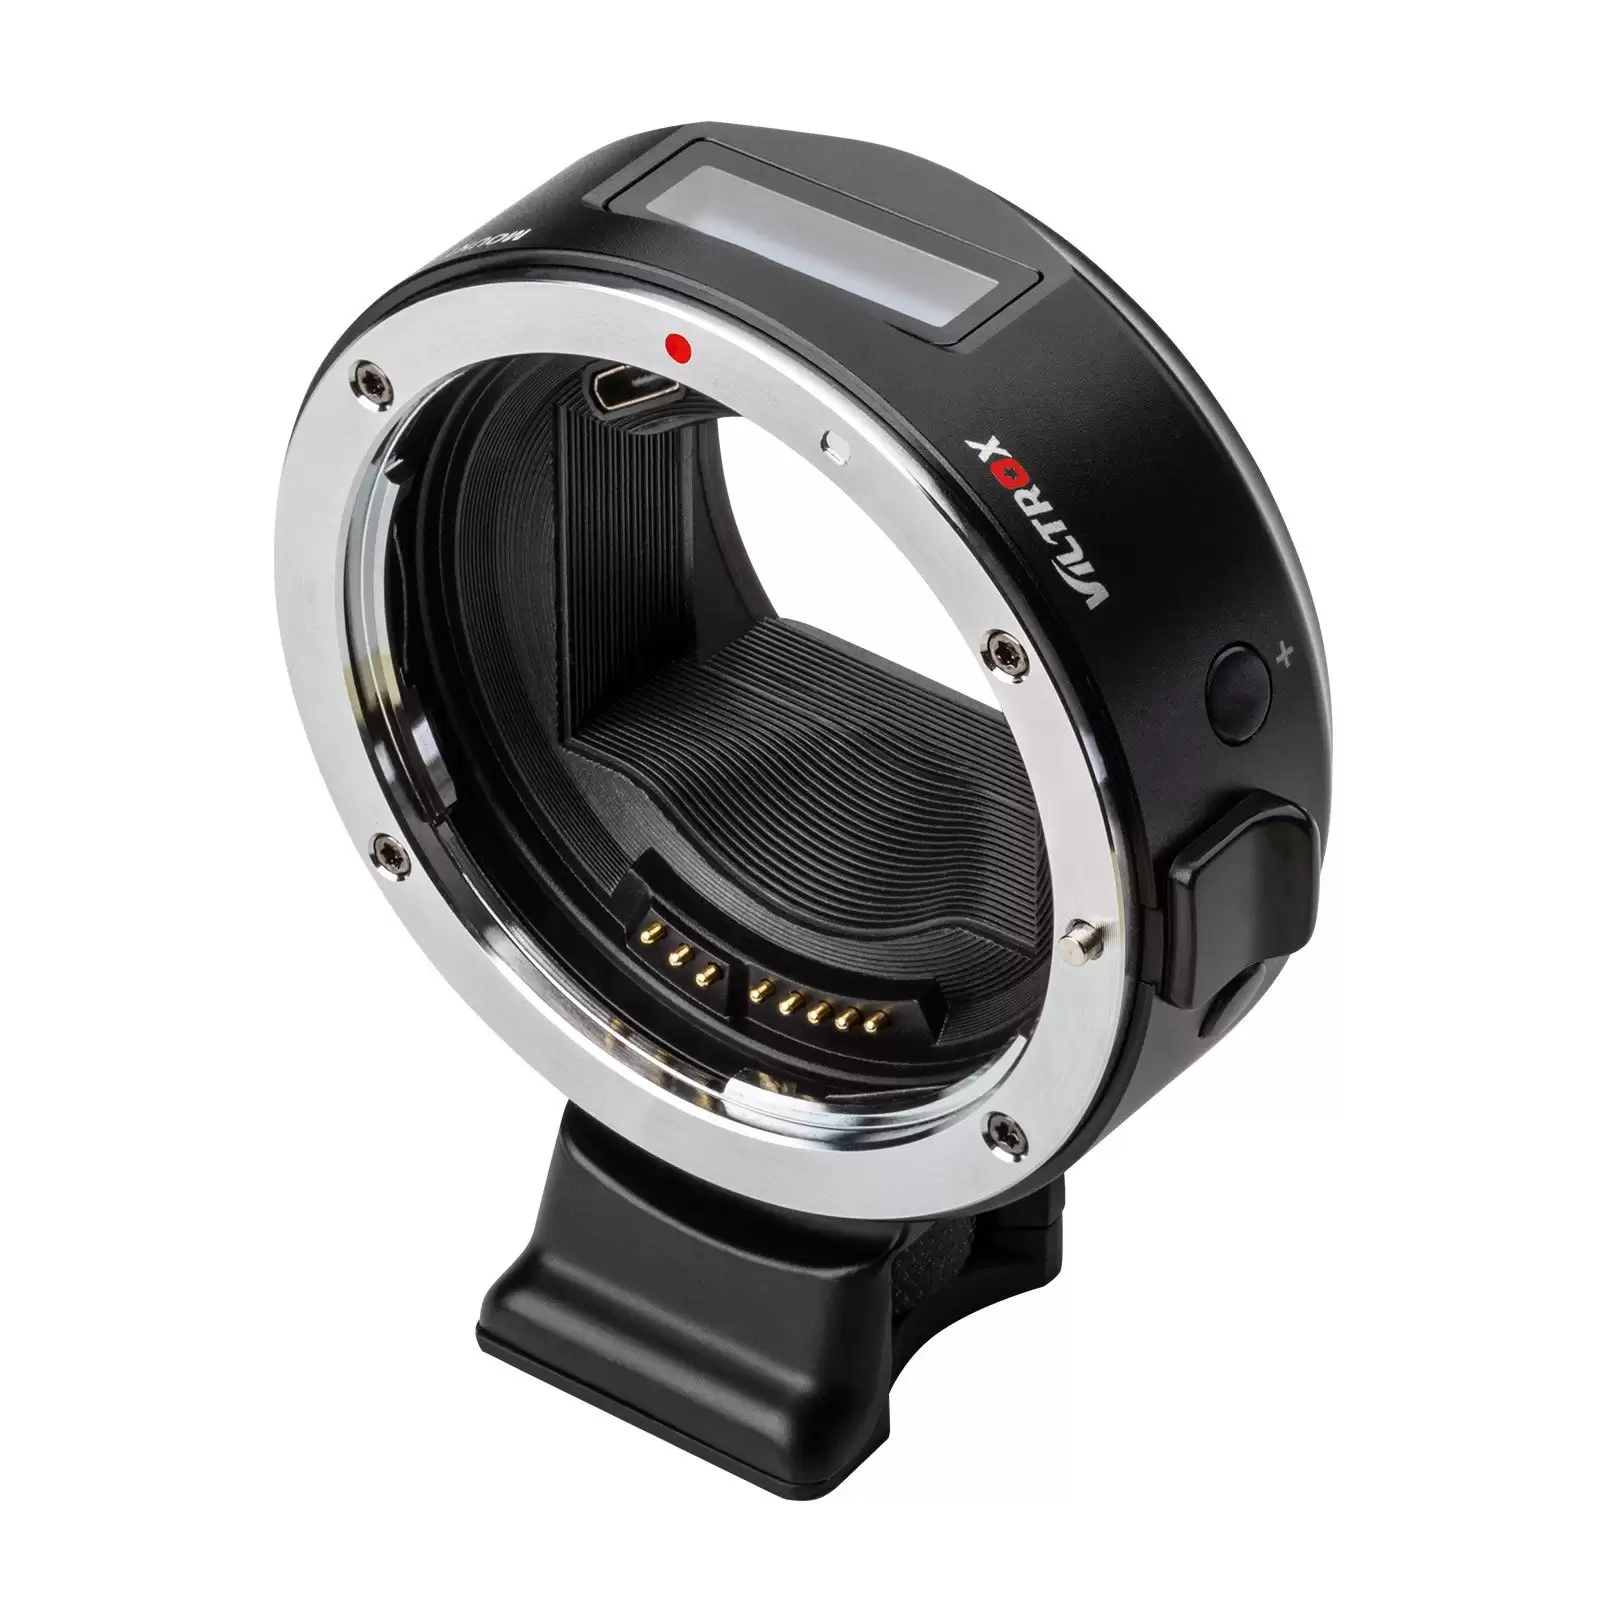 Order In Just $169.99 Get 47% Discount On Viltrox Ef-E5 Upgraded Camera Lens Mount Adapter With This Discount Coupon At Tomtop